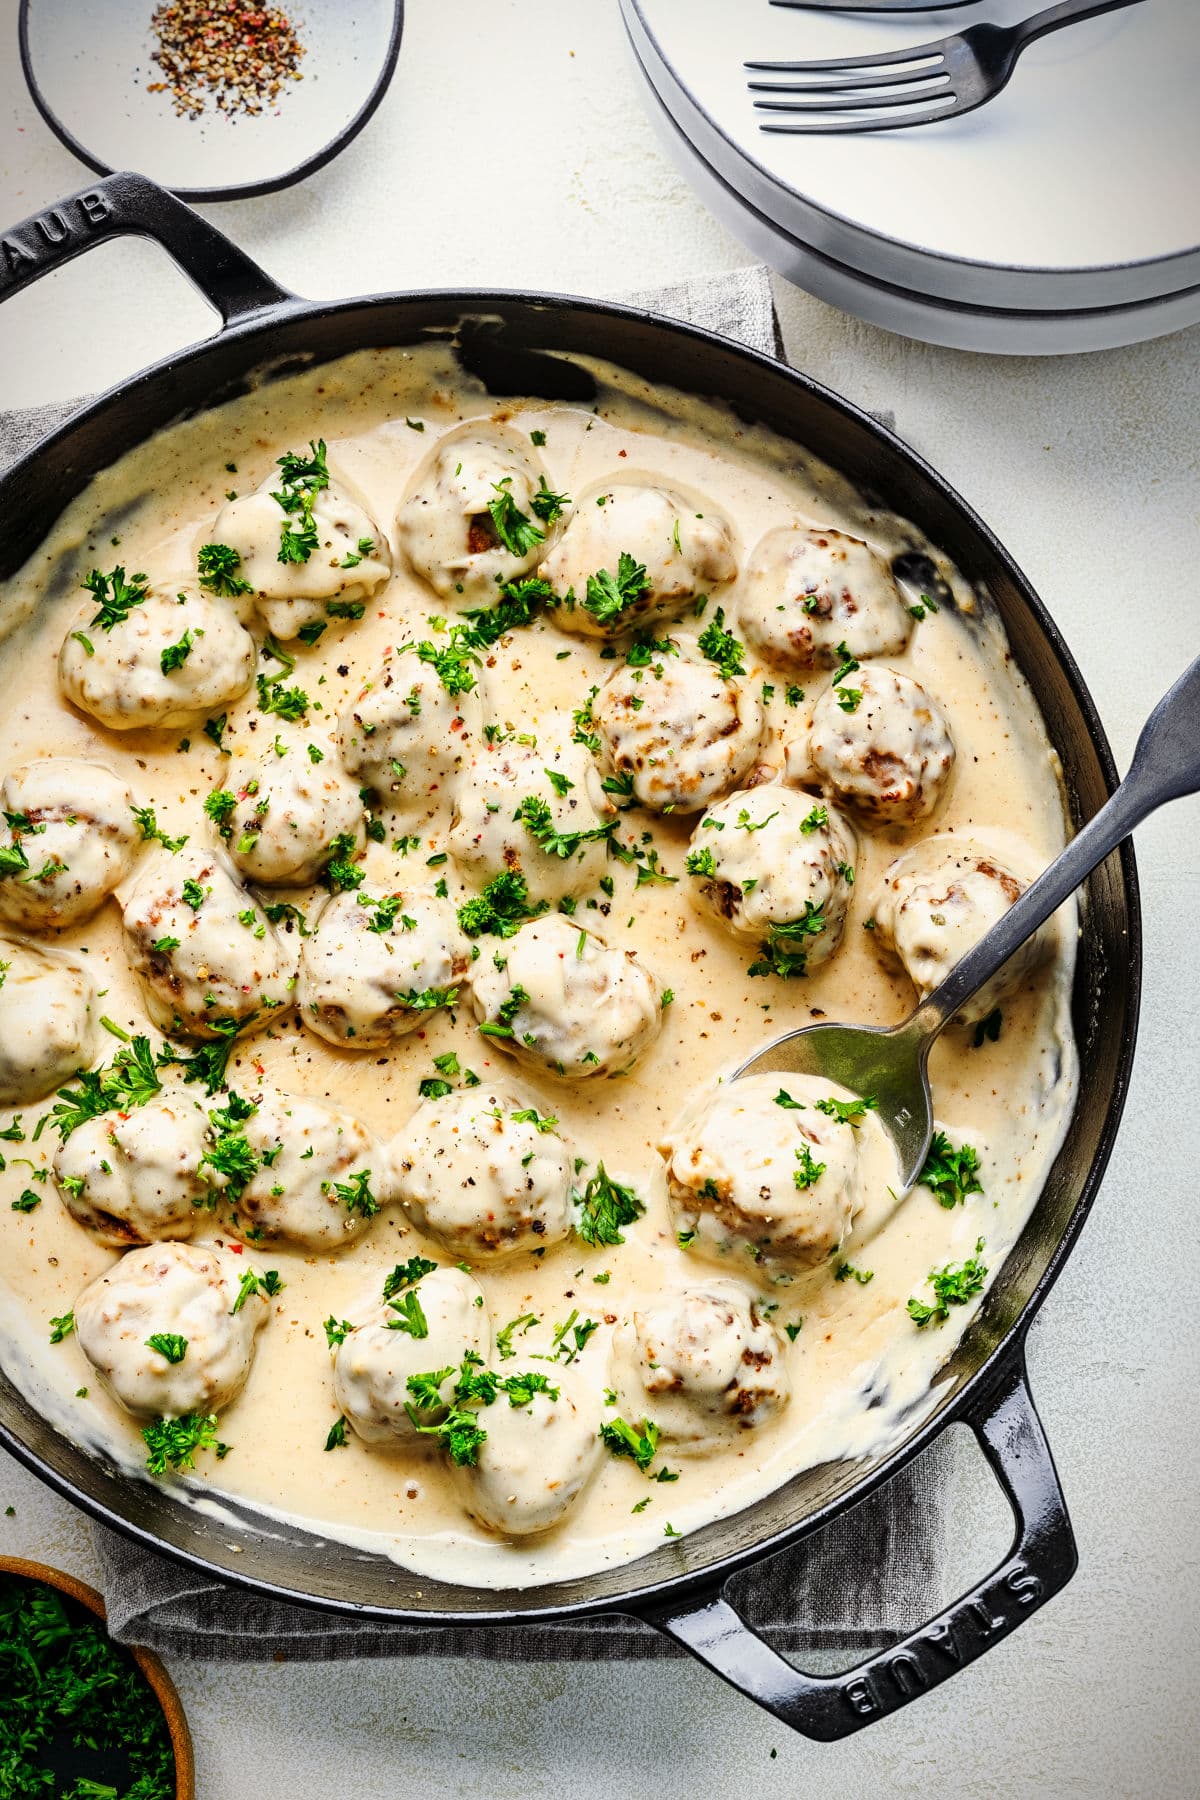 A silver spoon holding a meatball in a cast iron dish of Swedish meatballs.